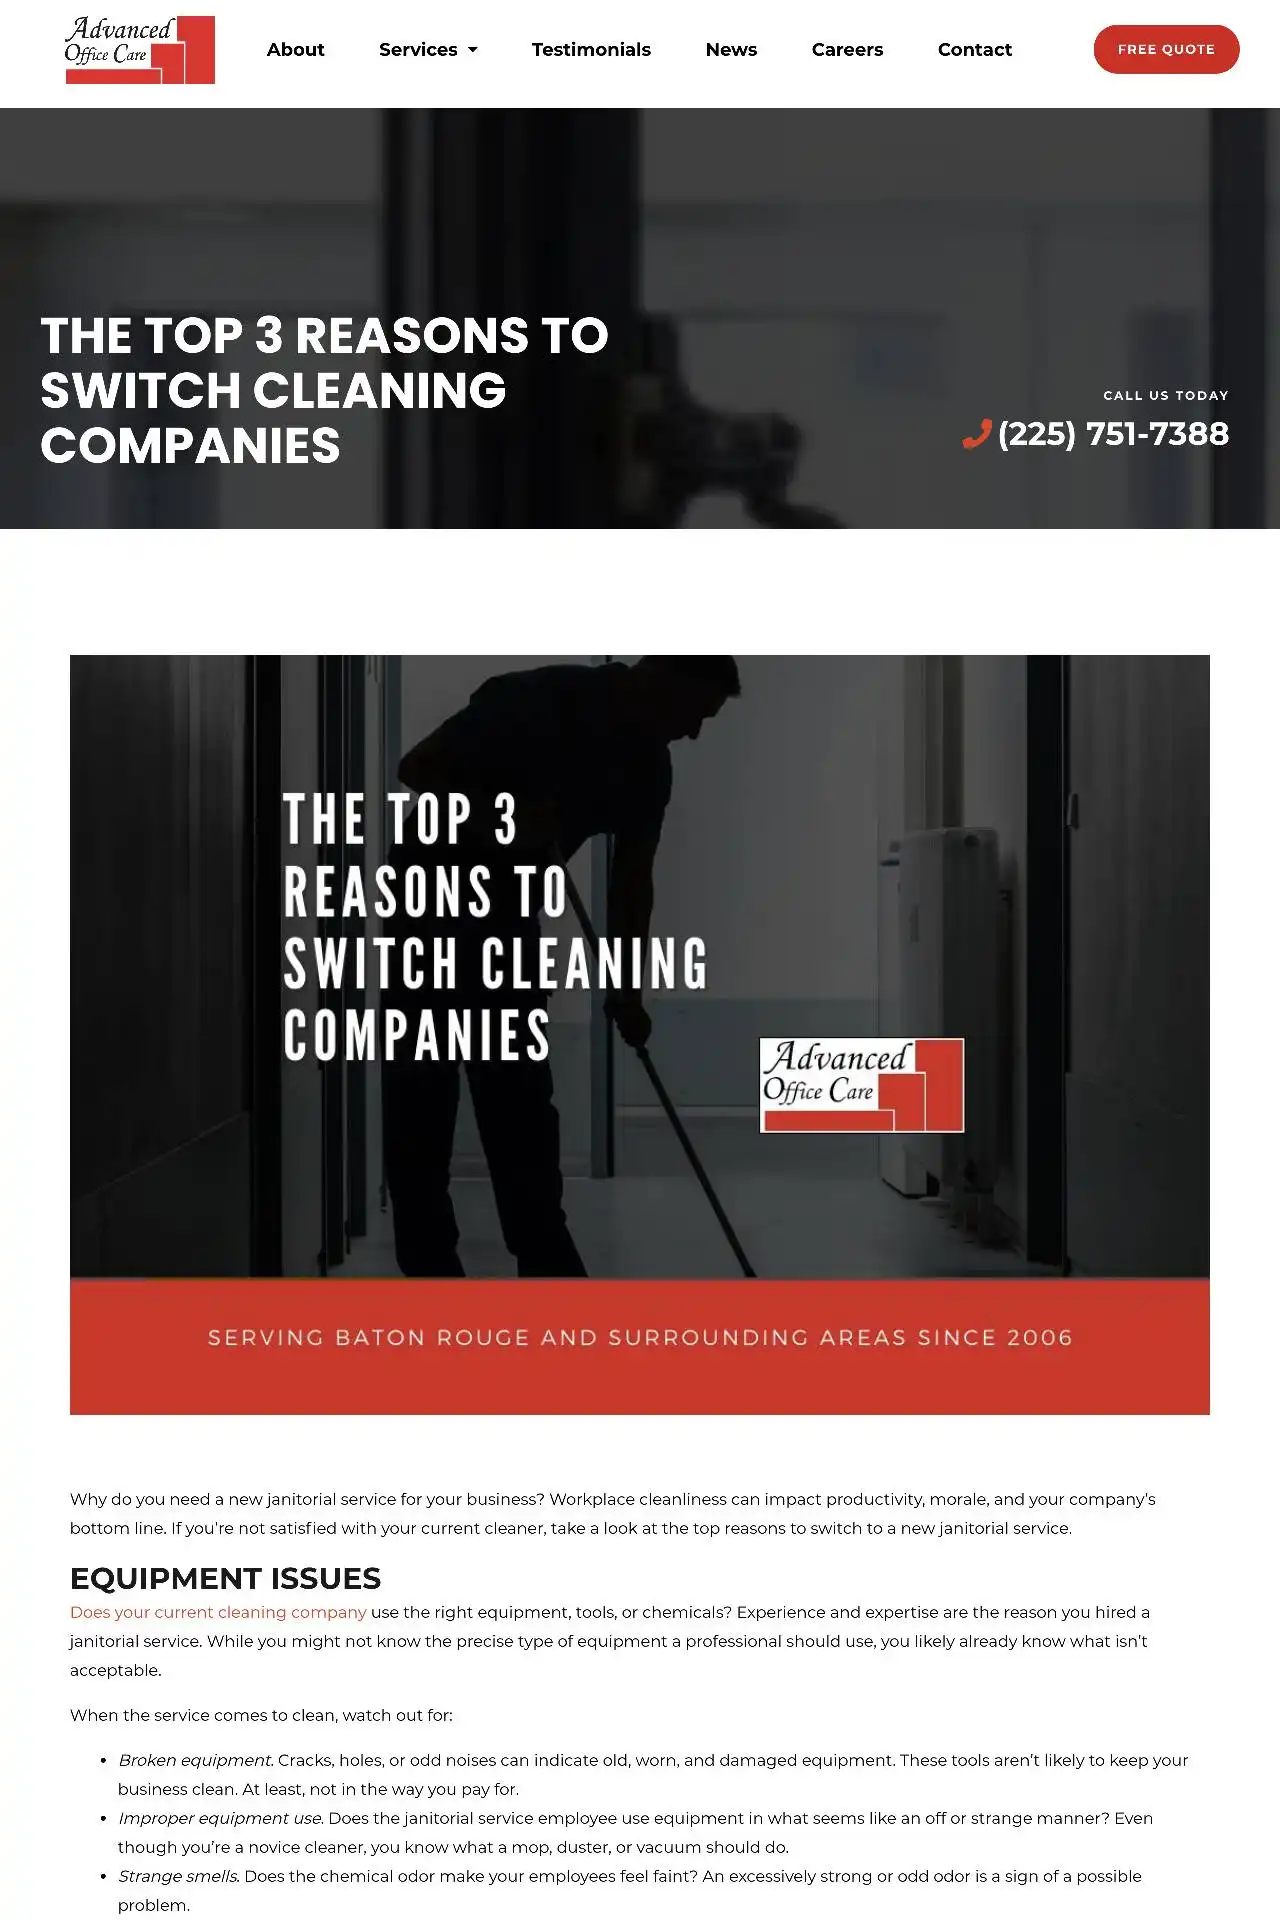 baton rouge cleaning company website design development https aocla.com cleaning the top 3 reasons to switch cleaning companies